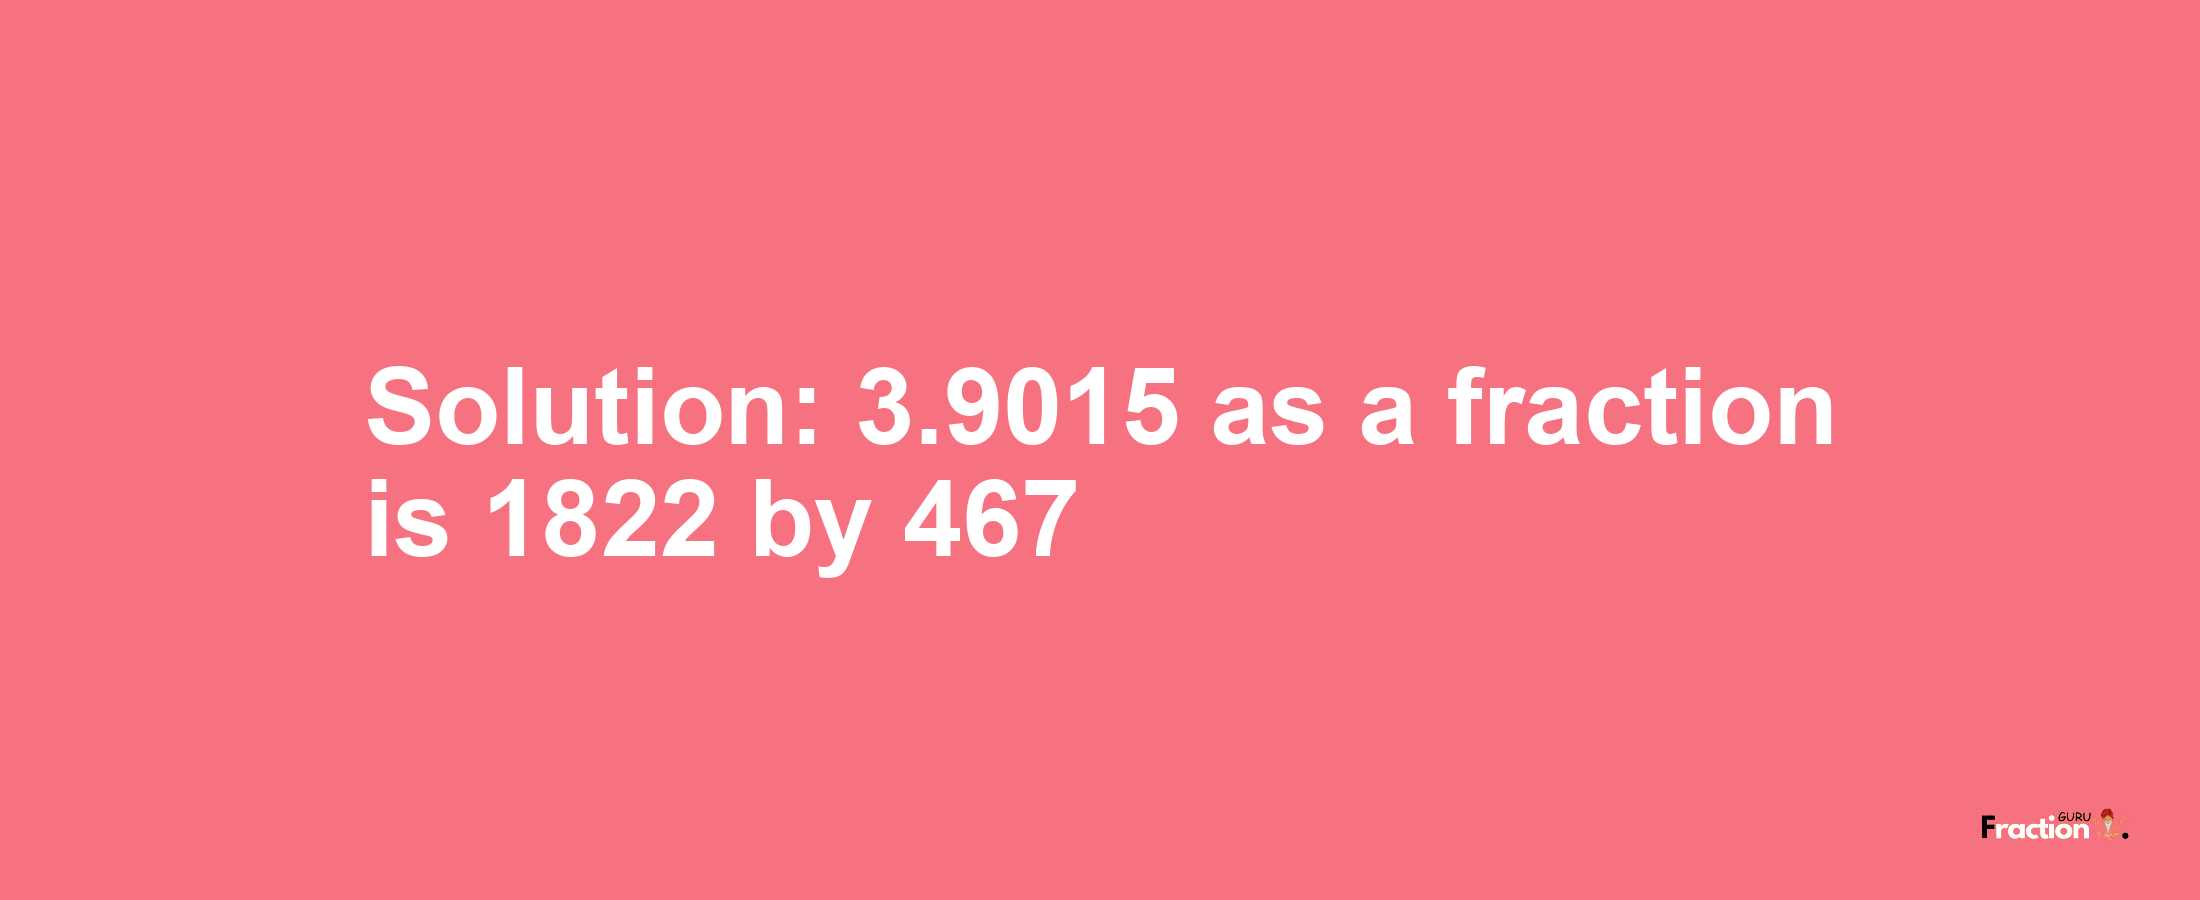 Solution:3.9015 as a fraction is 1822/467